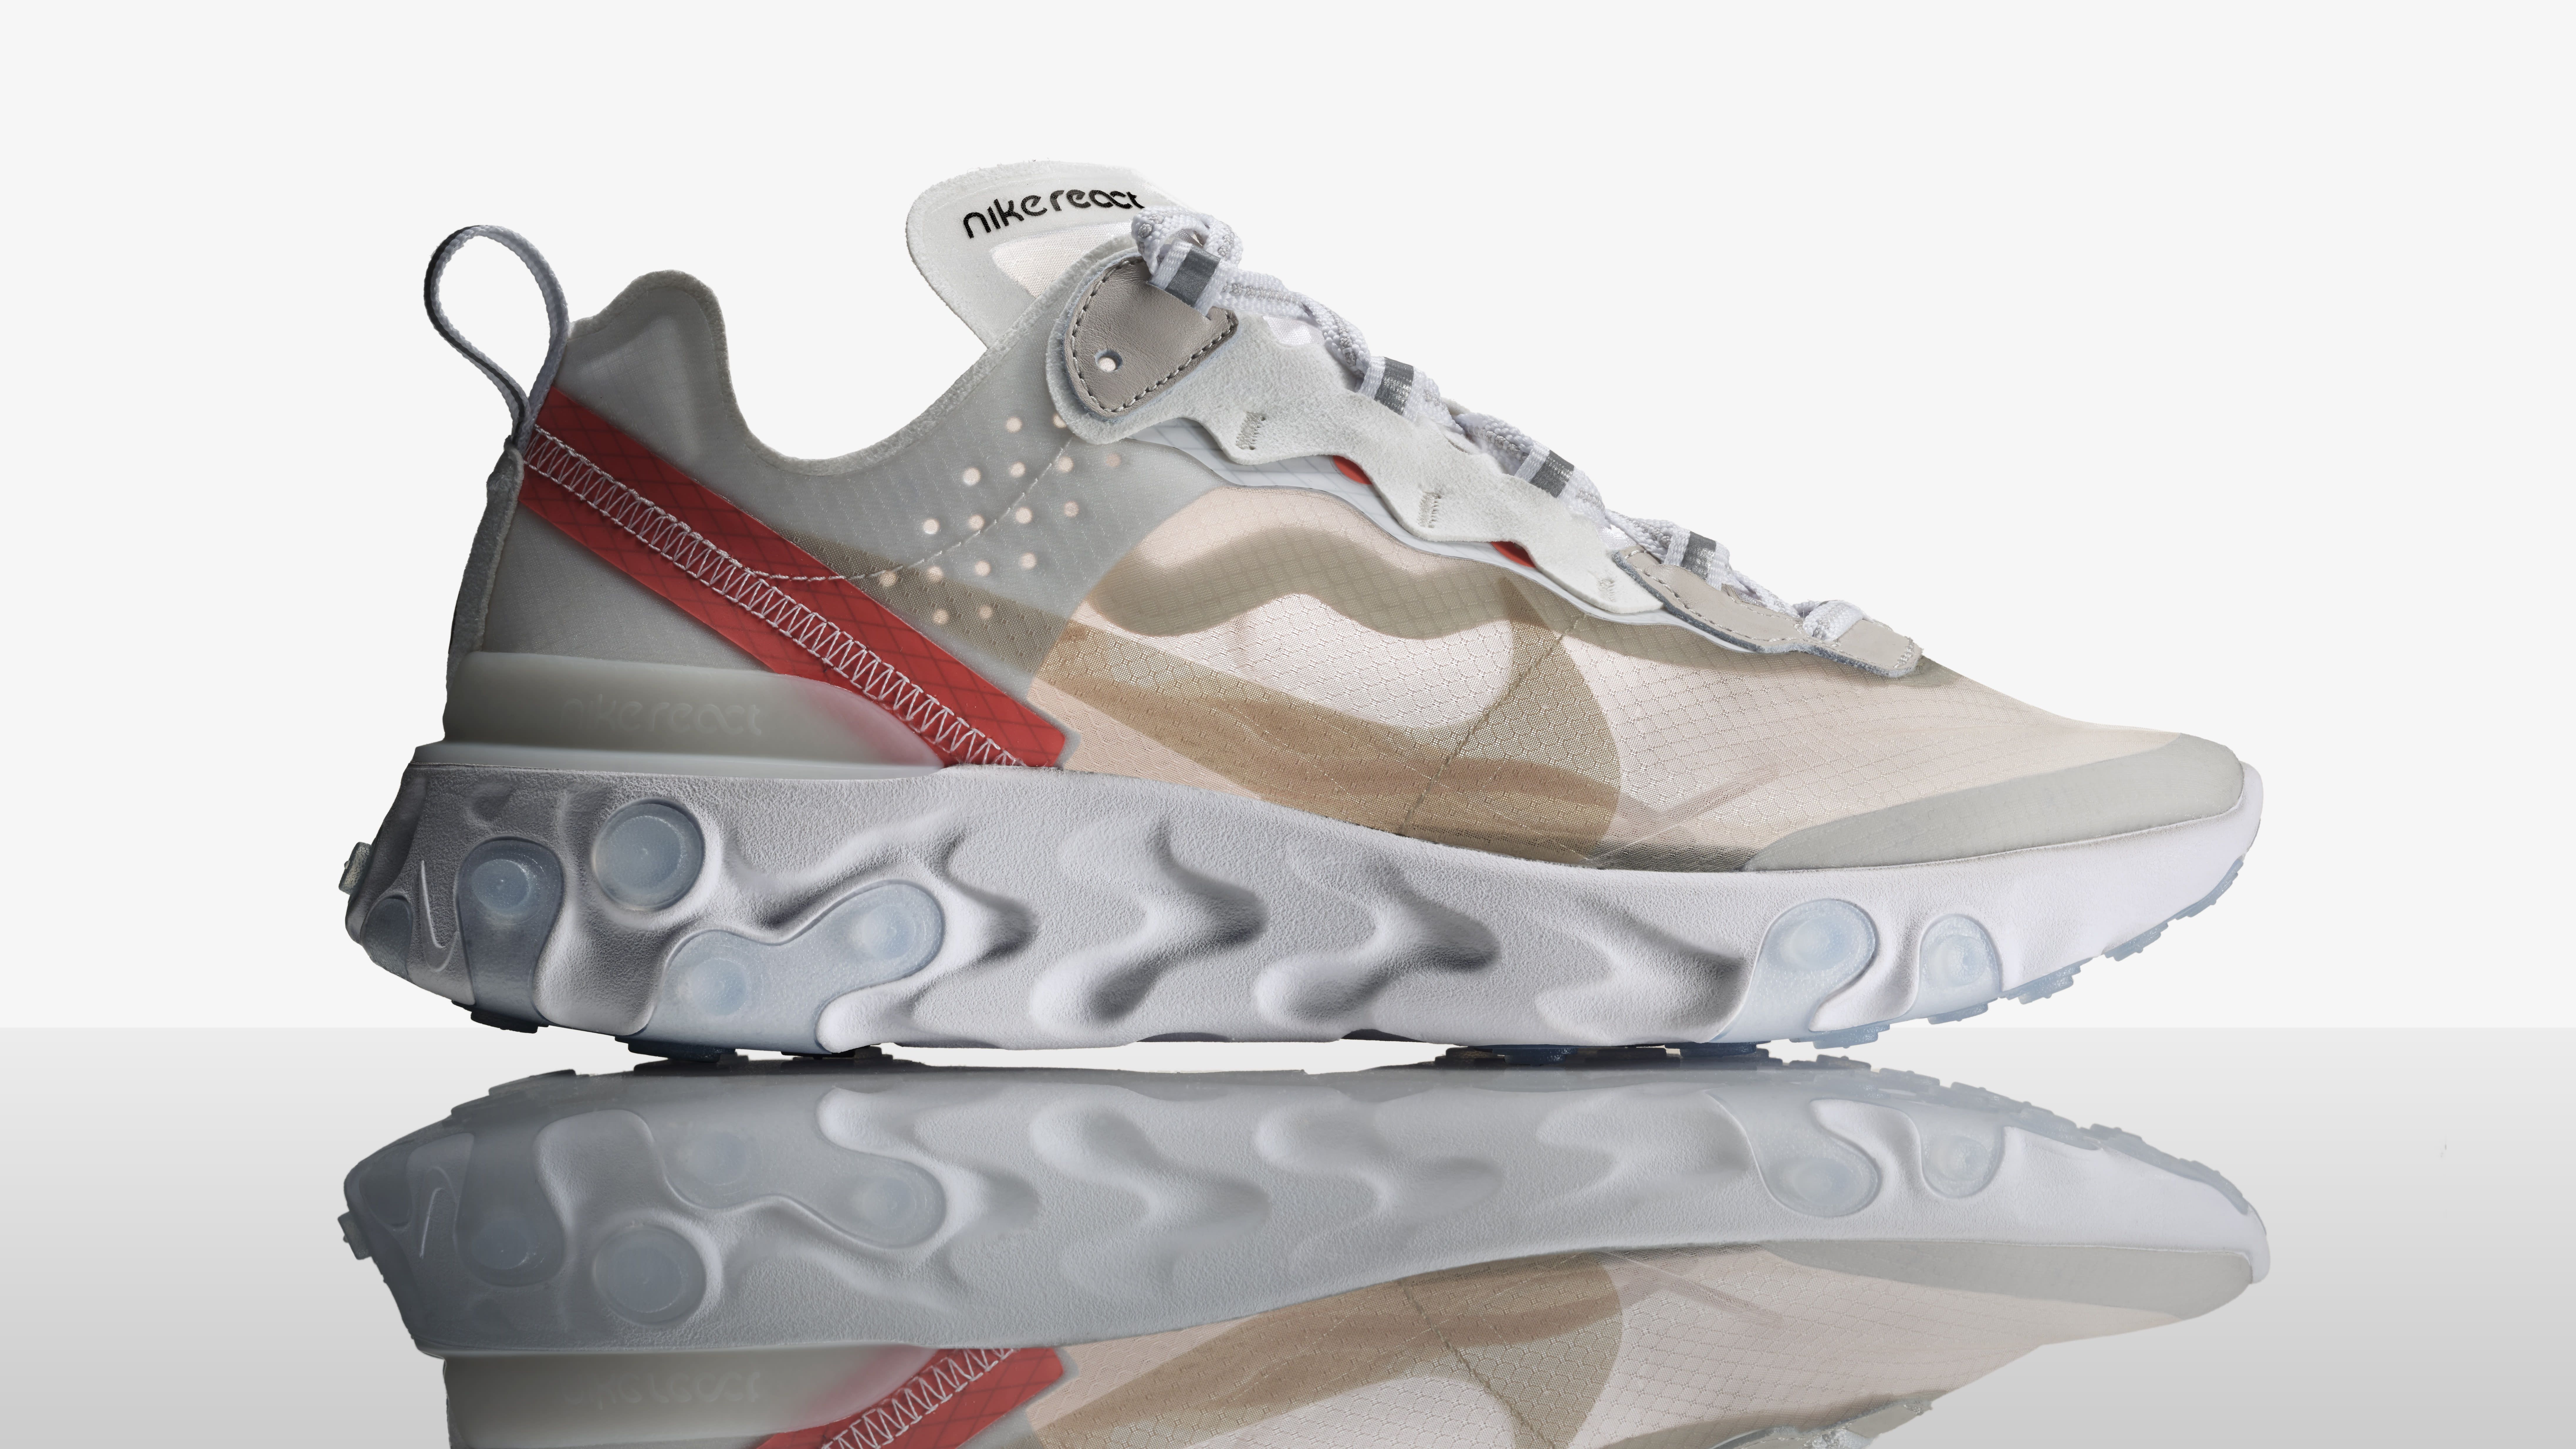 The Drop Date on X: THE SHOE SURGEON combines the AIR JORDAN 1 with the  material composition of the NIKE REACT ELEMENT 87 in this latest custom   / X